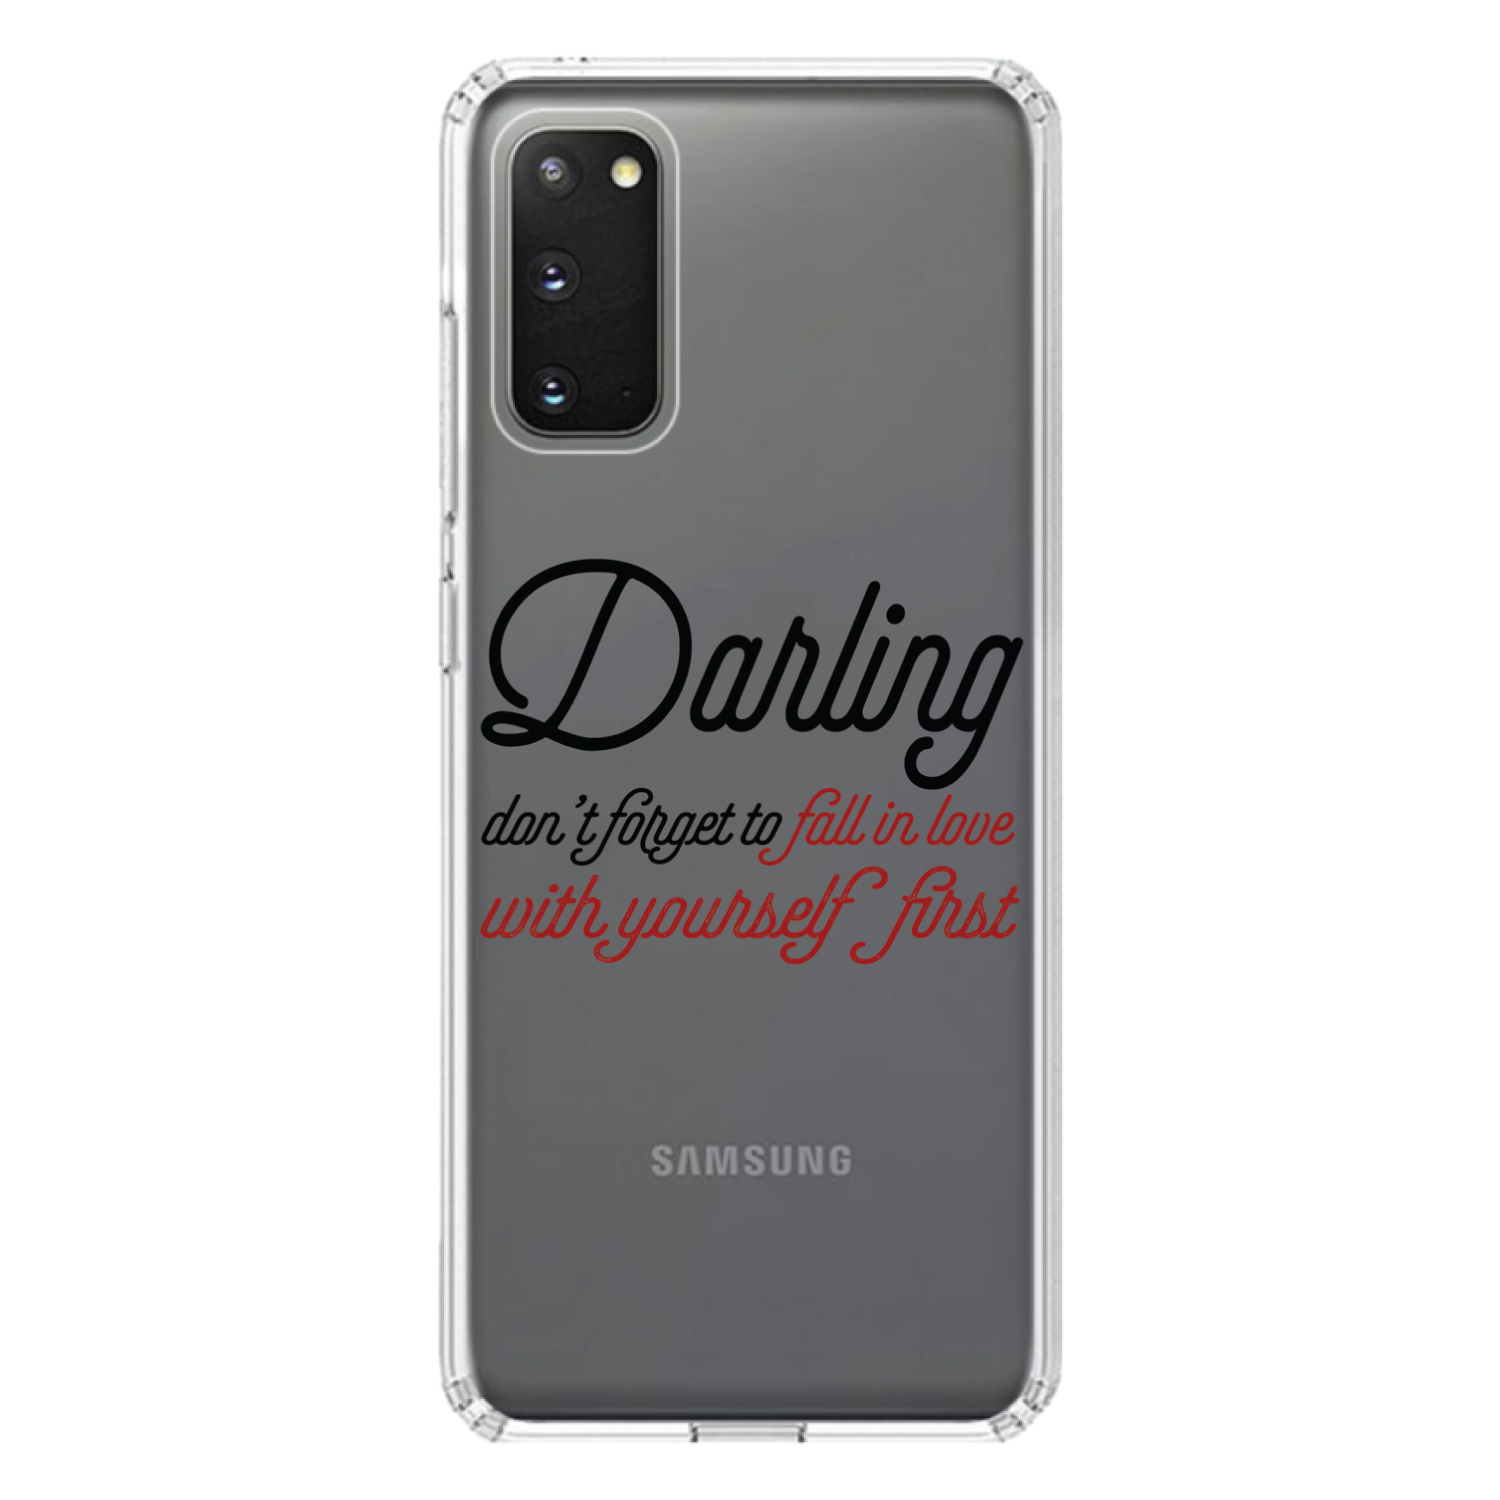 DistinctInk Clear Shockproof Hybrid Case for Galaxy S20 ULTRA / 5G (6.9" Screen) - TPU Bumper Acrylic Back Tempered Glass Screen Protector - Darling Don't Forget to Fall In Love with Yourself - image 1 of 2